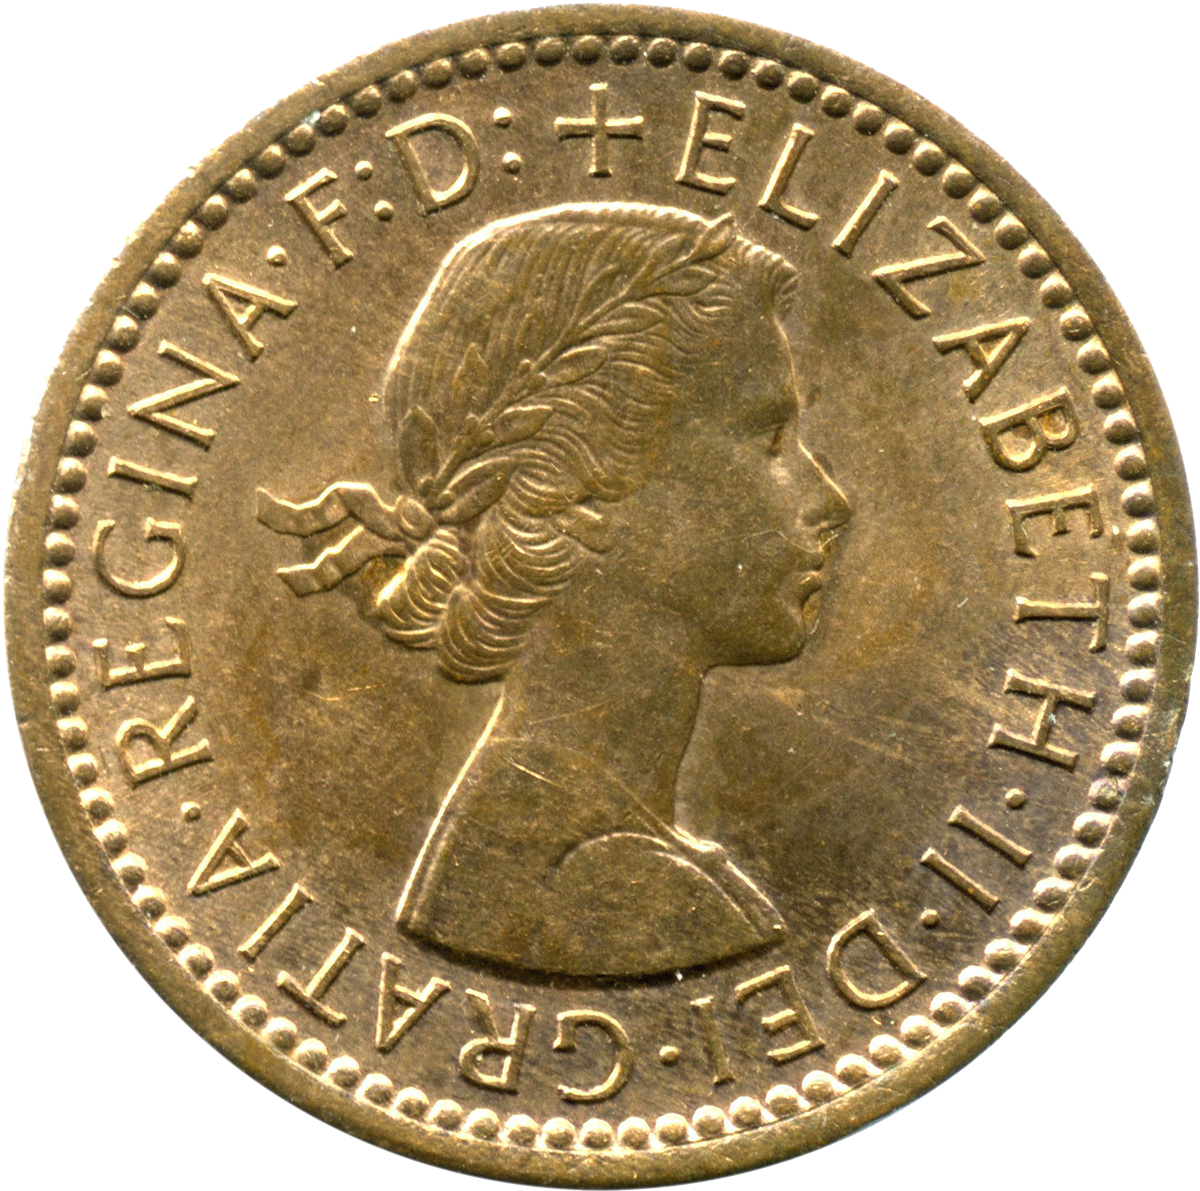 A Gold Coin With A Woman's Face